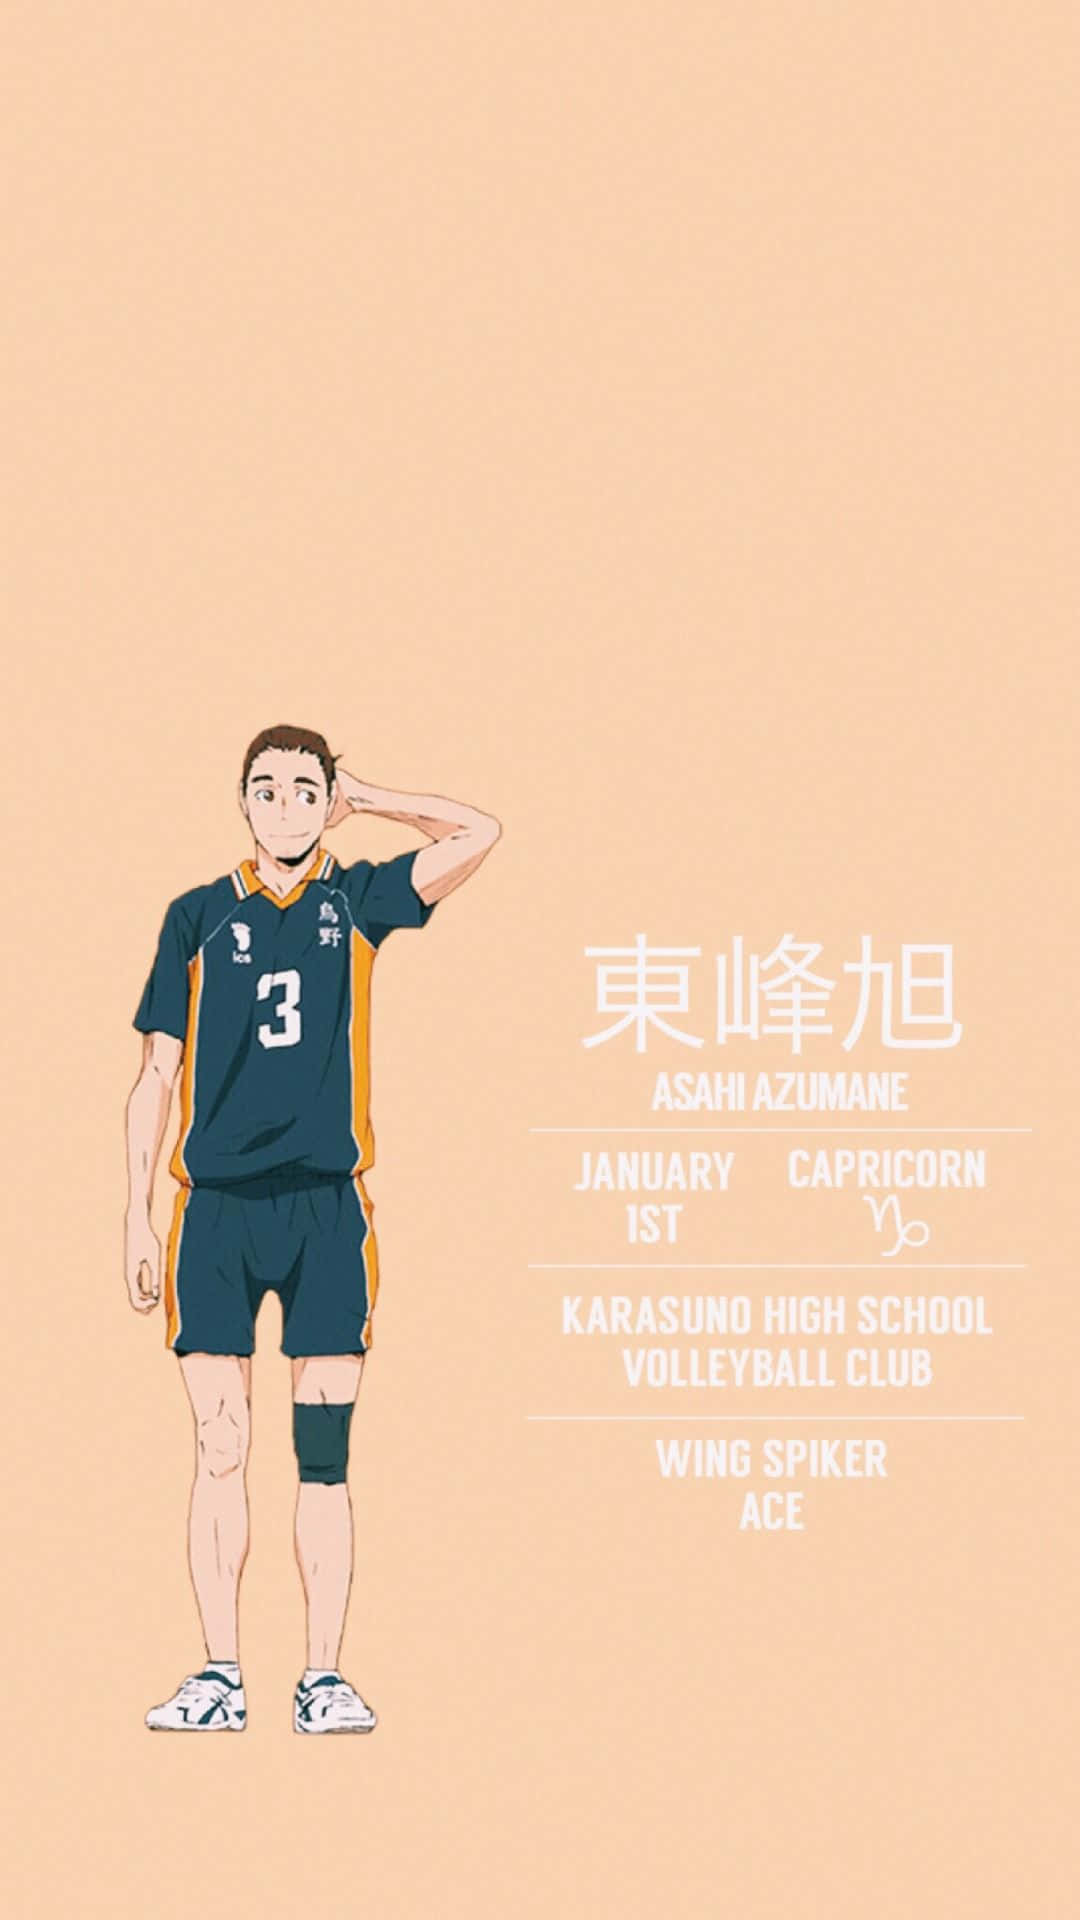 Asahi Azumane Smiling in the Volleyball Court Wallpaper